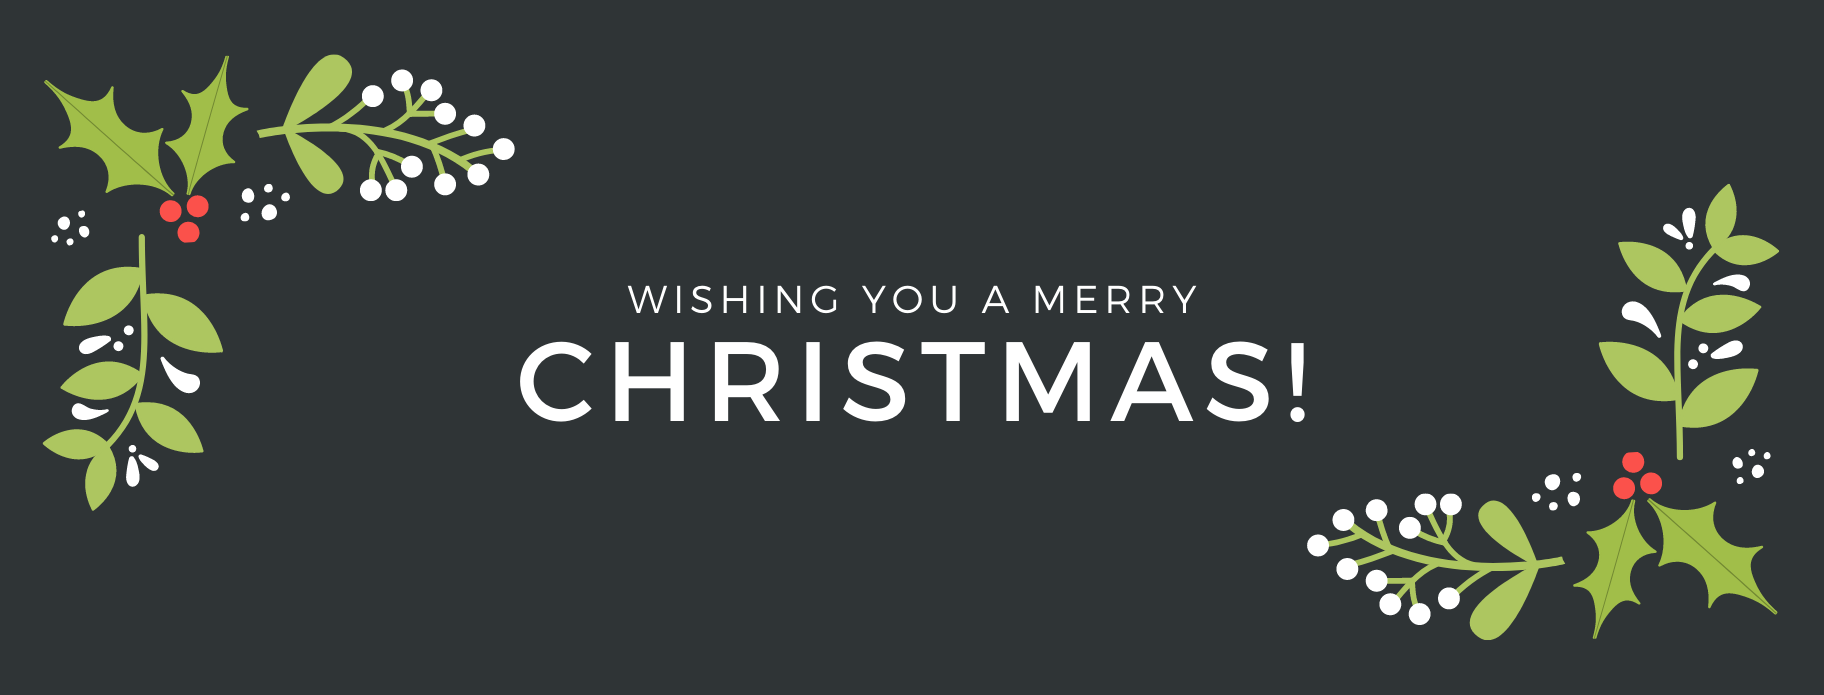 Our Christmas Message to You